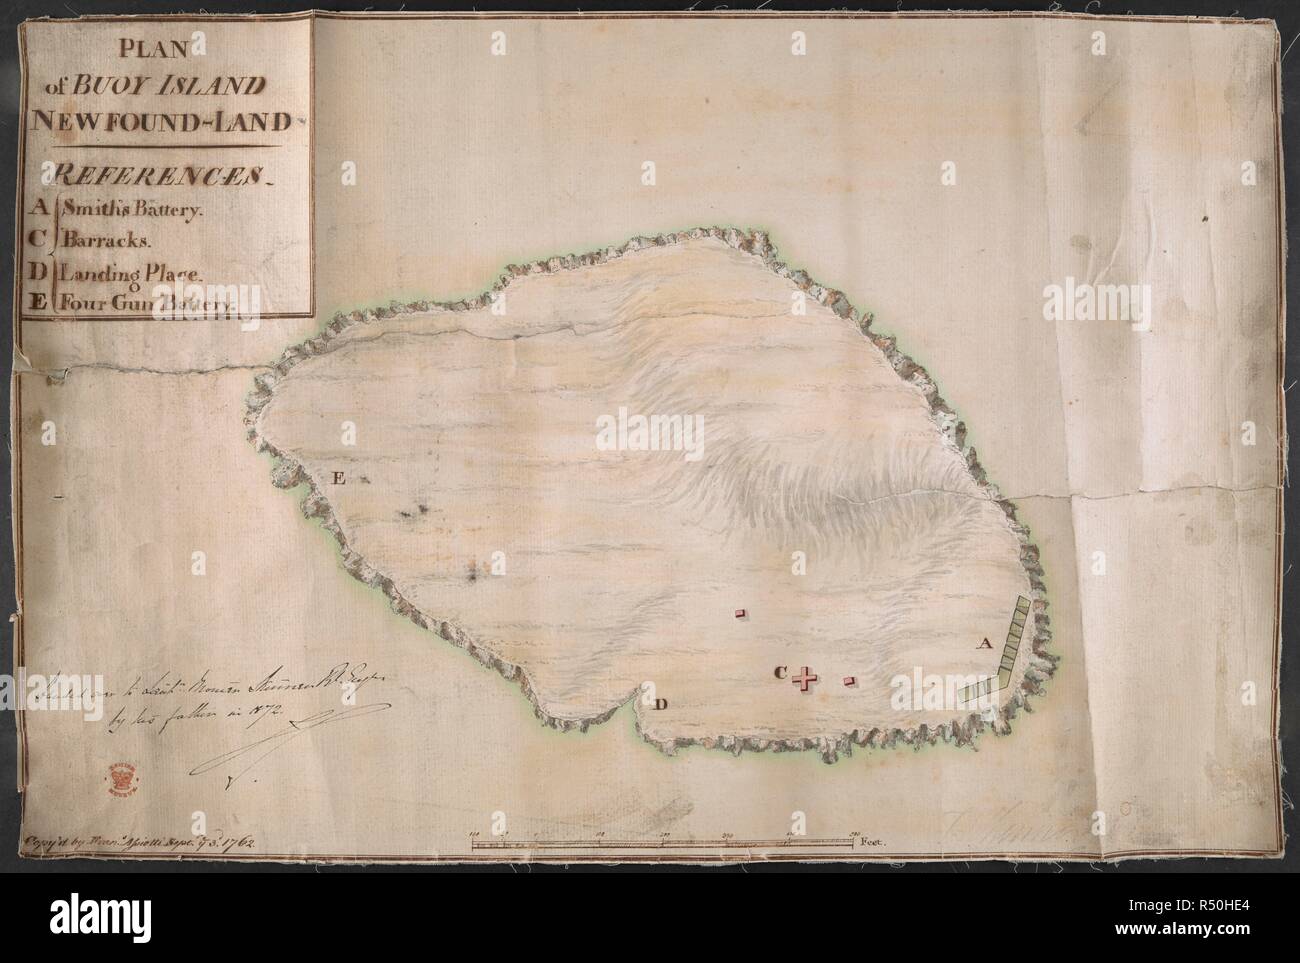 Plan of Buoy island, New found-land. References: A: Smith's battery. B: Barracks C: Landing place D: Four gun battery. . MAPS and Plans, chiefly of fortifications or surveys for miltary purposes. 17th century-18th century. Cop'd by Fran. (Francis) Assiotti, Sept. 1762. Source: Add. 33231.ii.15. Stock Photo